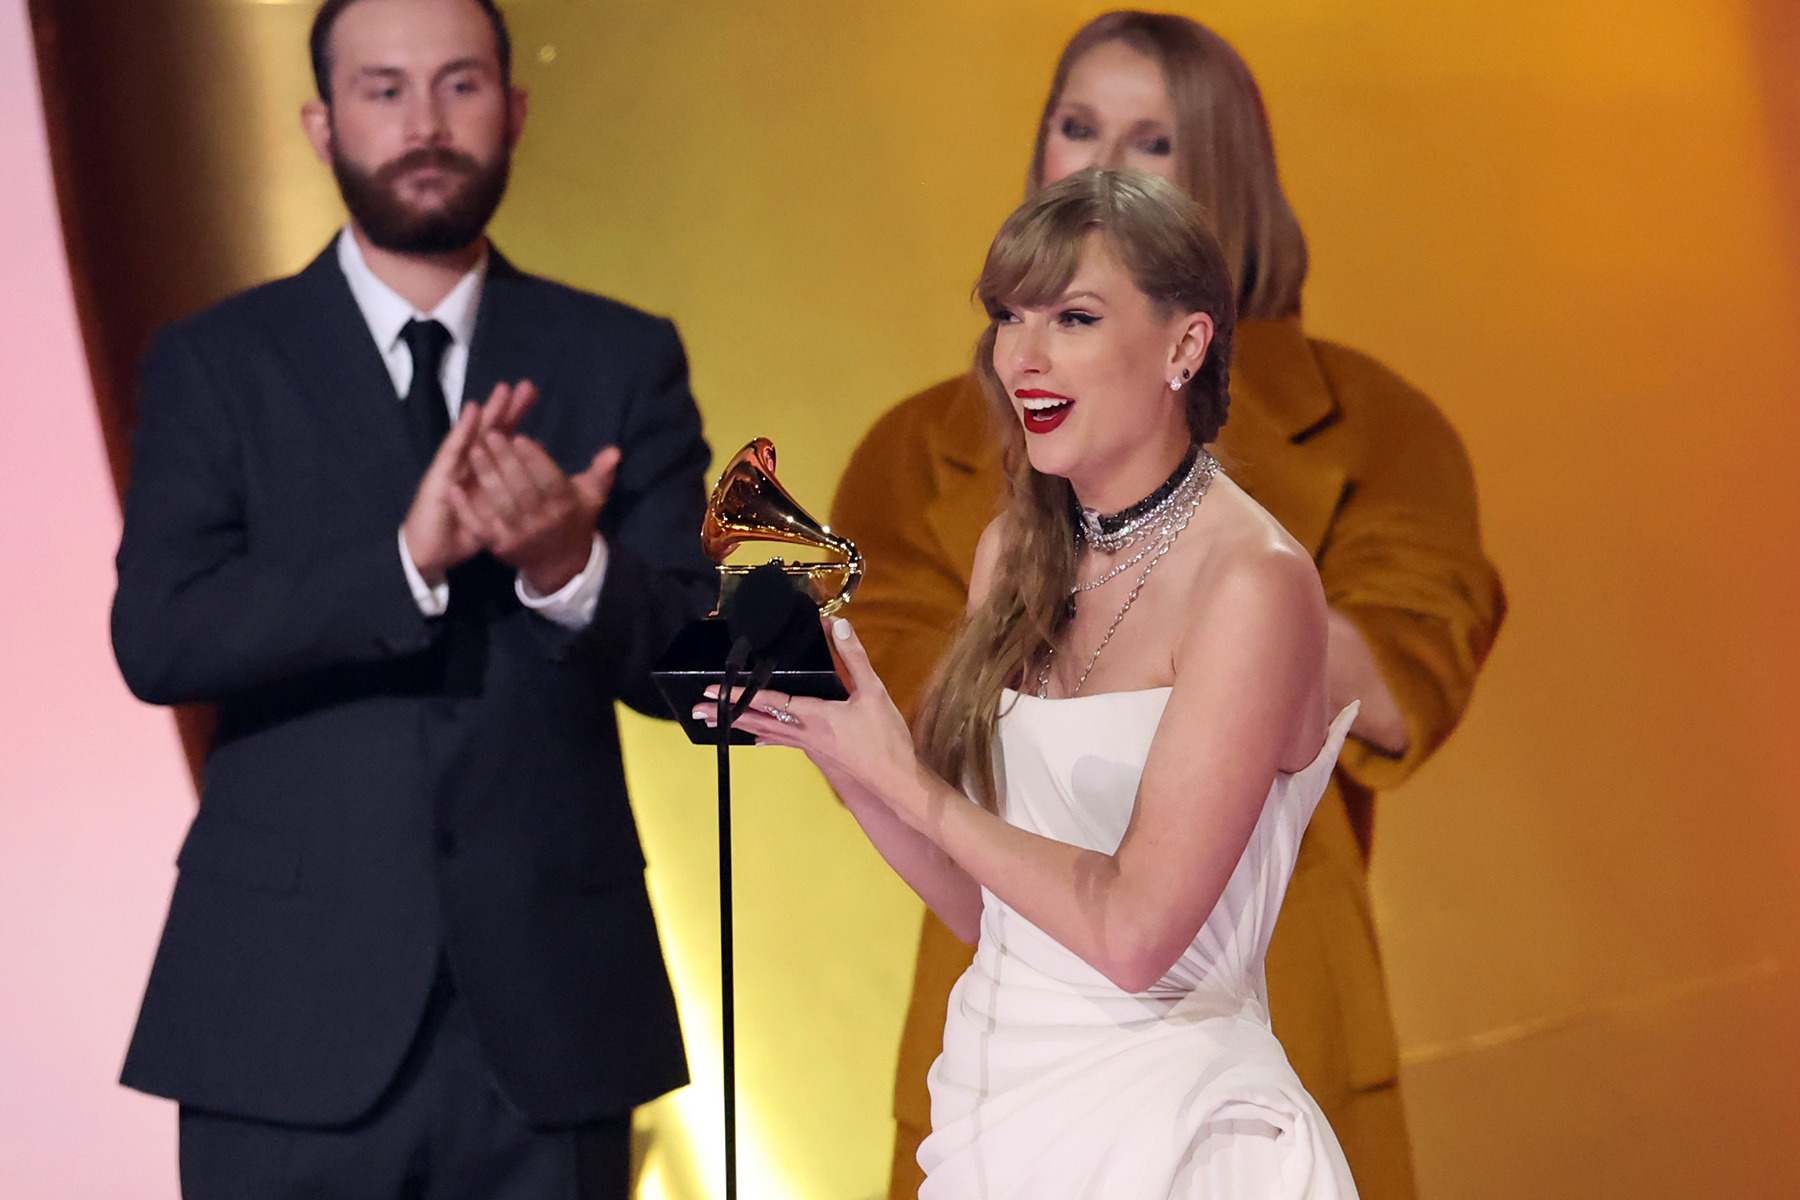 Taylor Swift Breaks Record for Most Album of the Year Grammys With Her